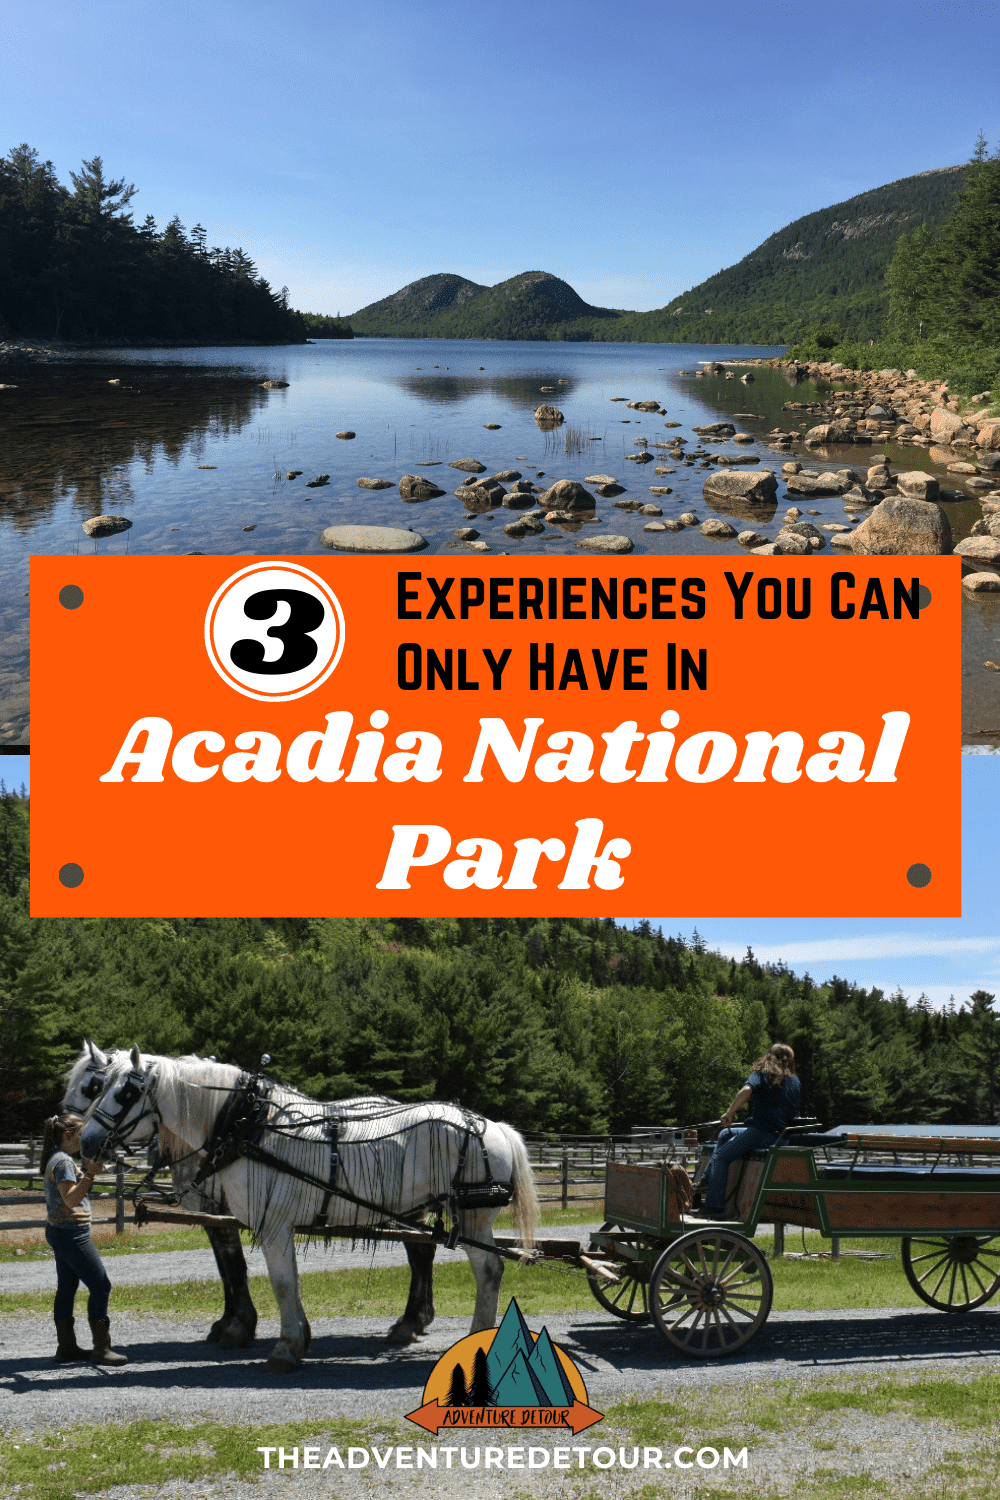 A Beautiful Lake And Carriage Ride Things To Do In Acadia